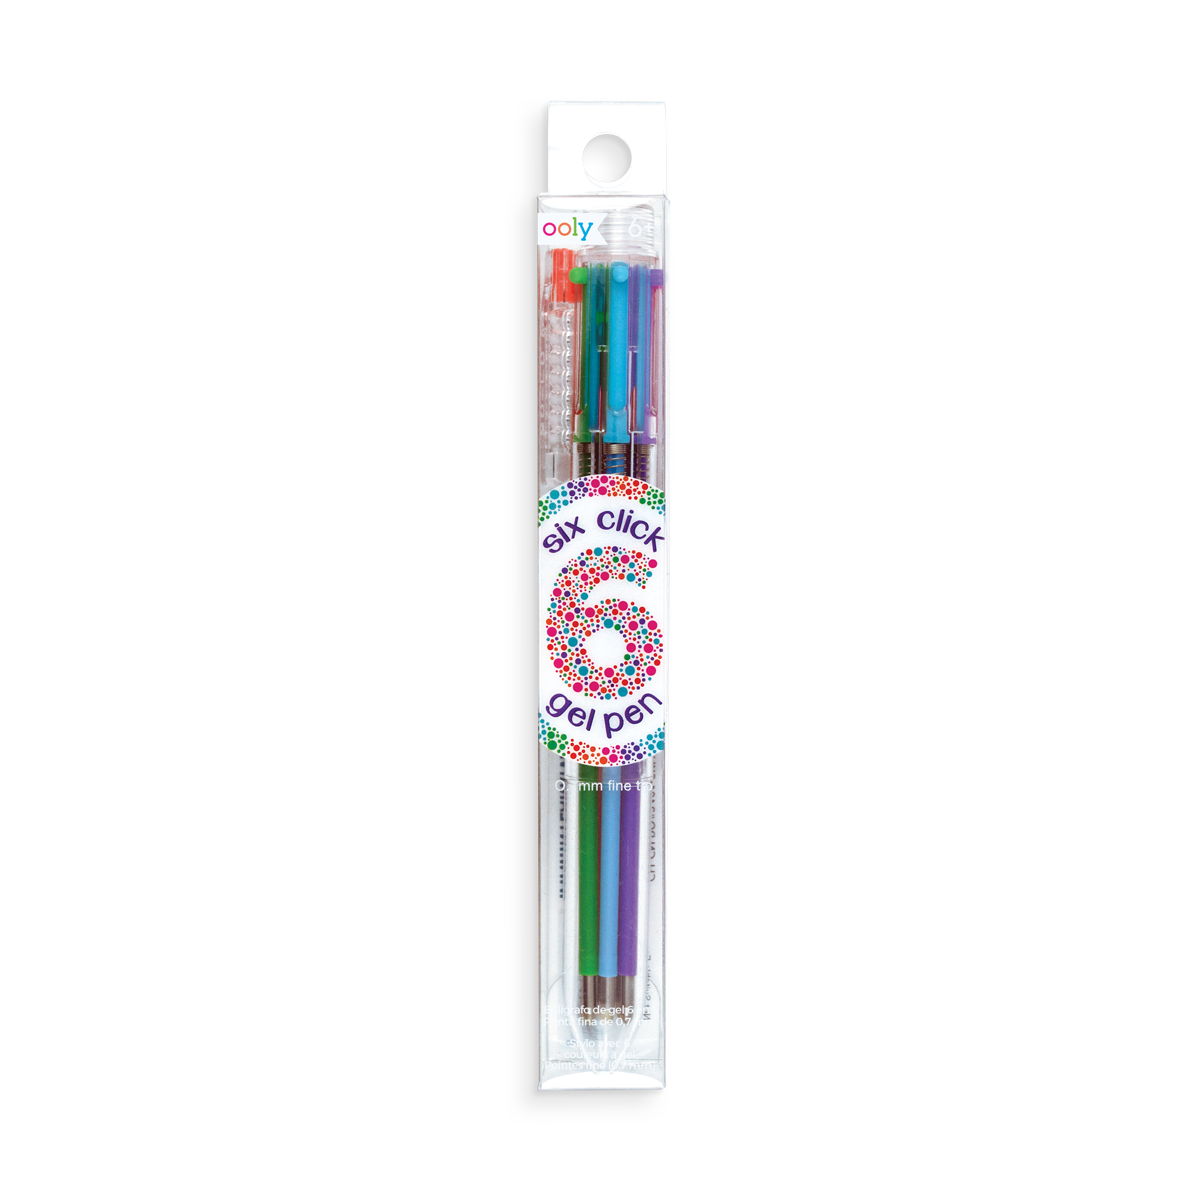 The 6 Click Gel Pen is a multi colored pen with 6 different gel ink colors.